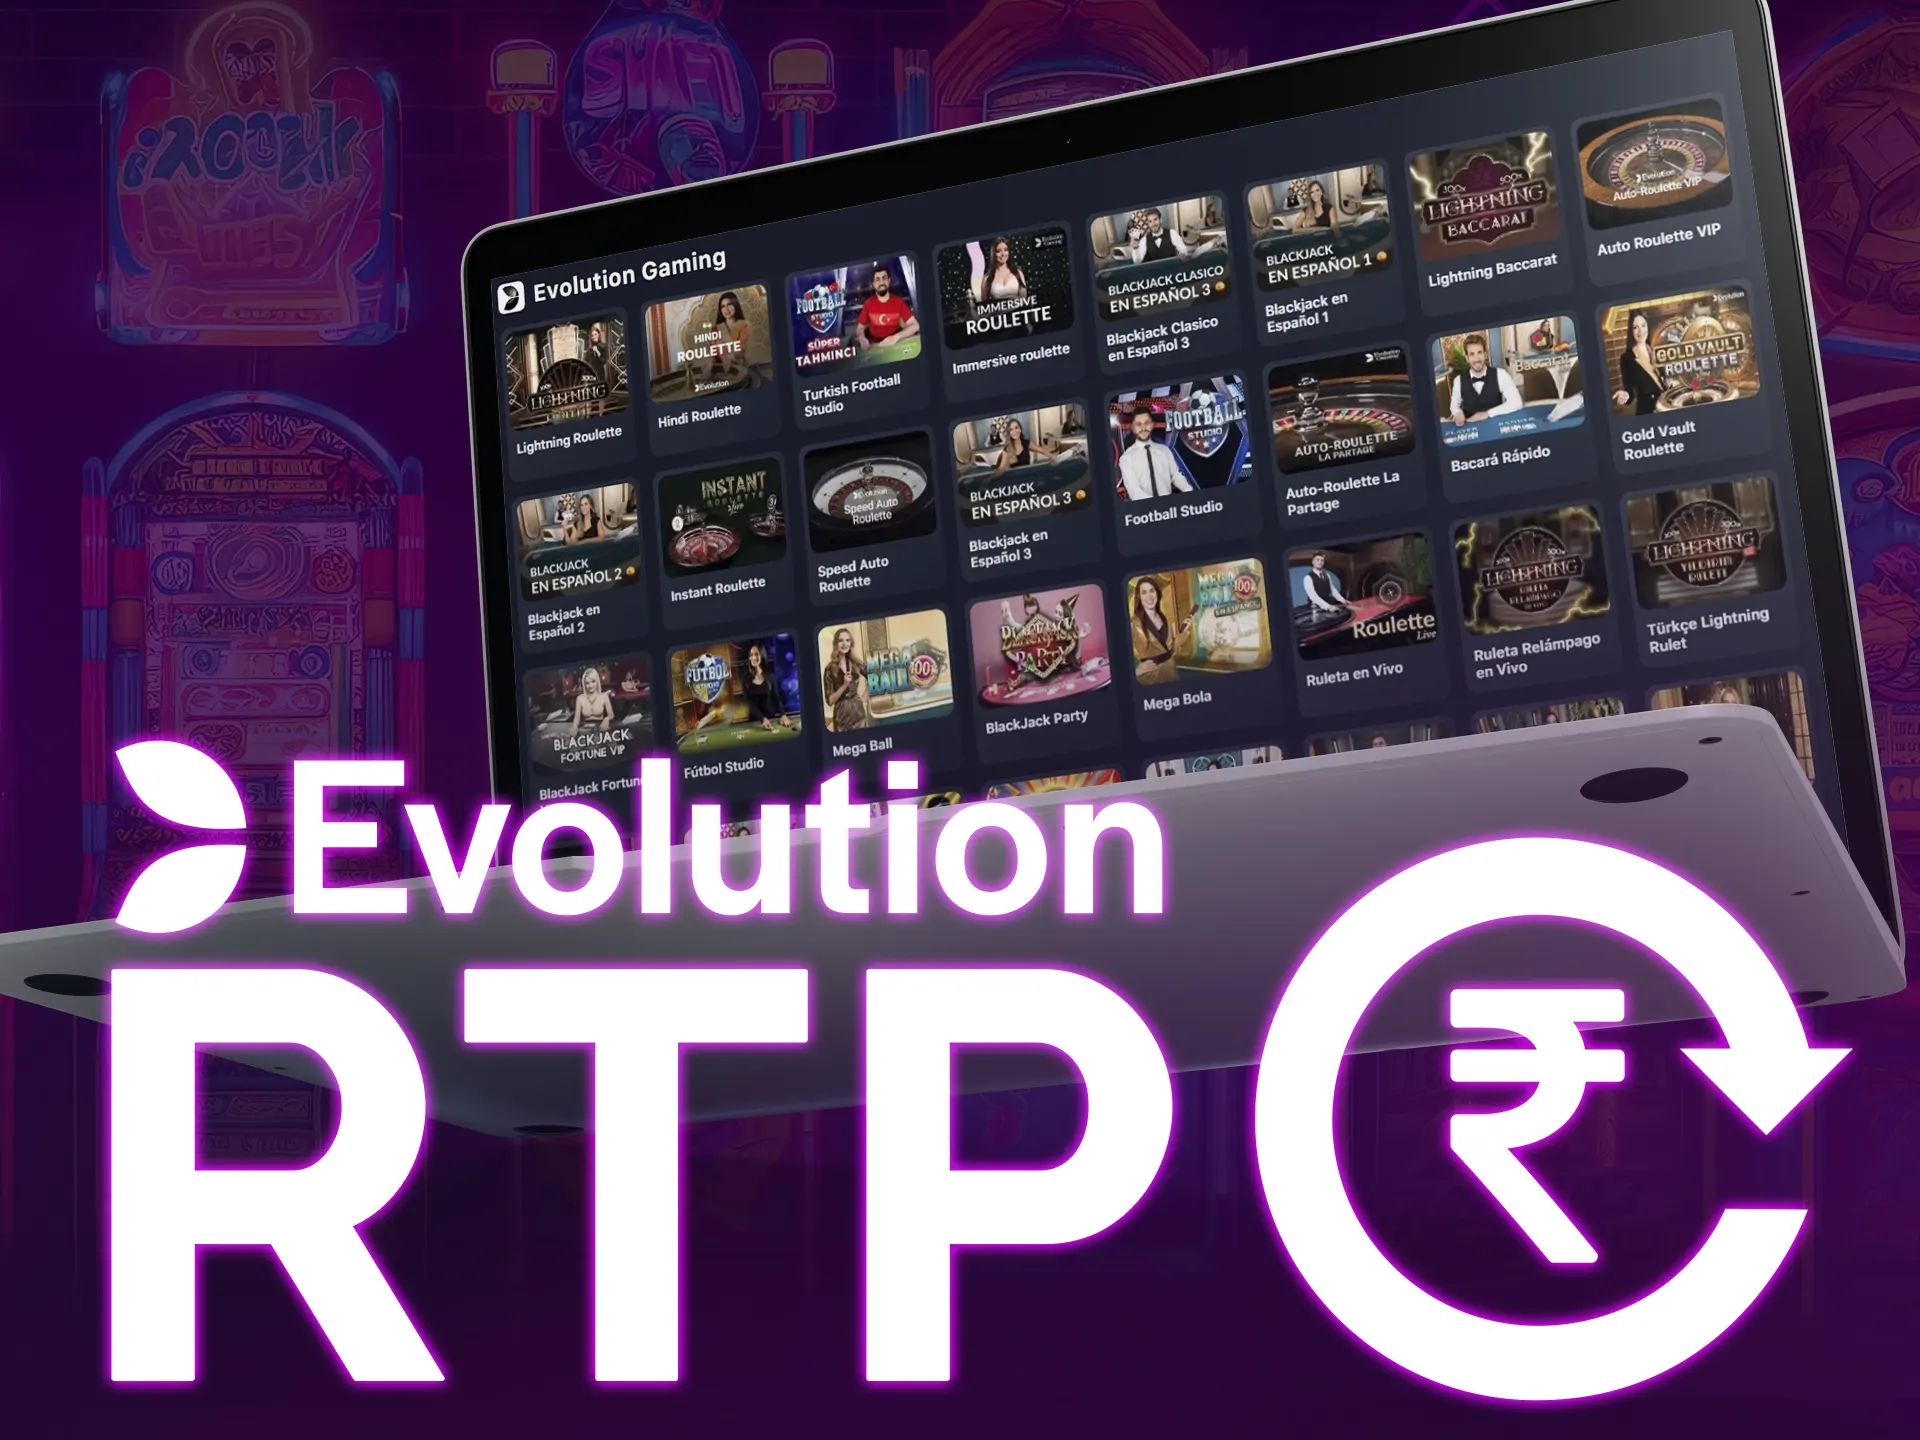 Evolution Gaming's games boast a high average RTP, ranging from 94% to 96%.